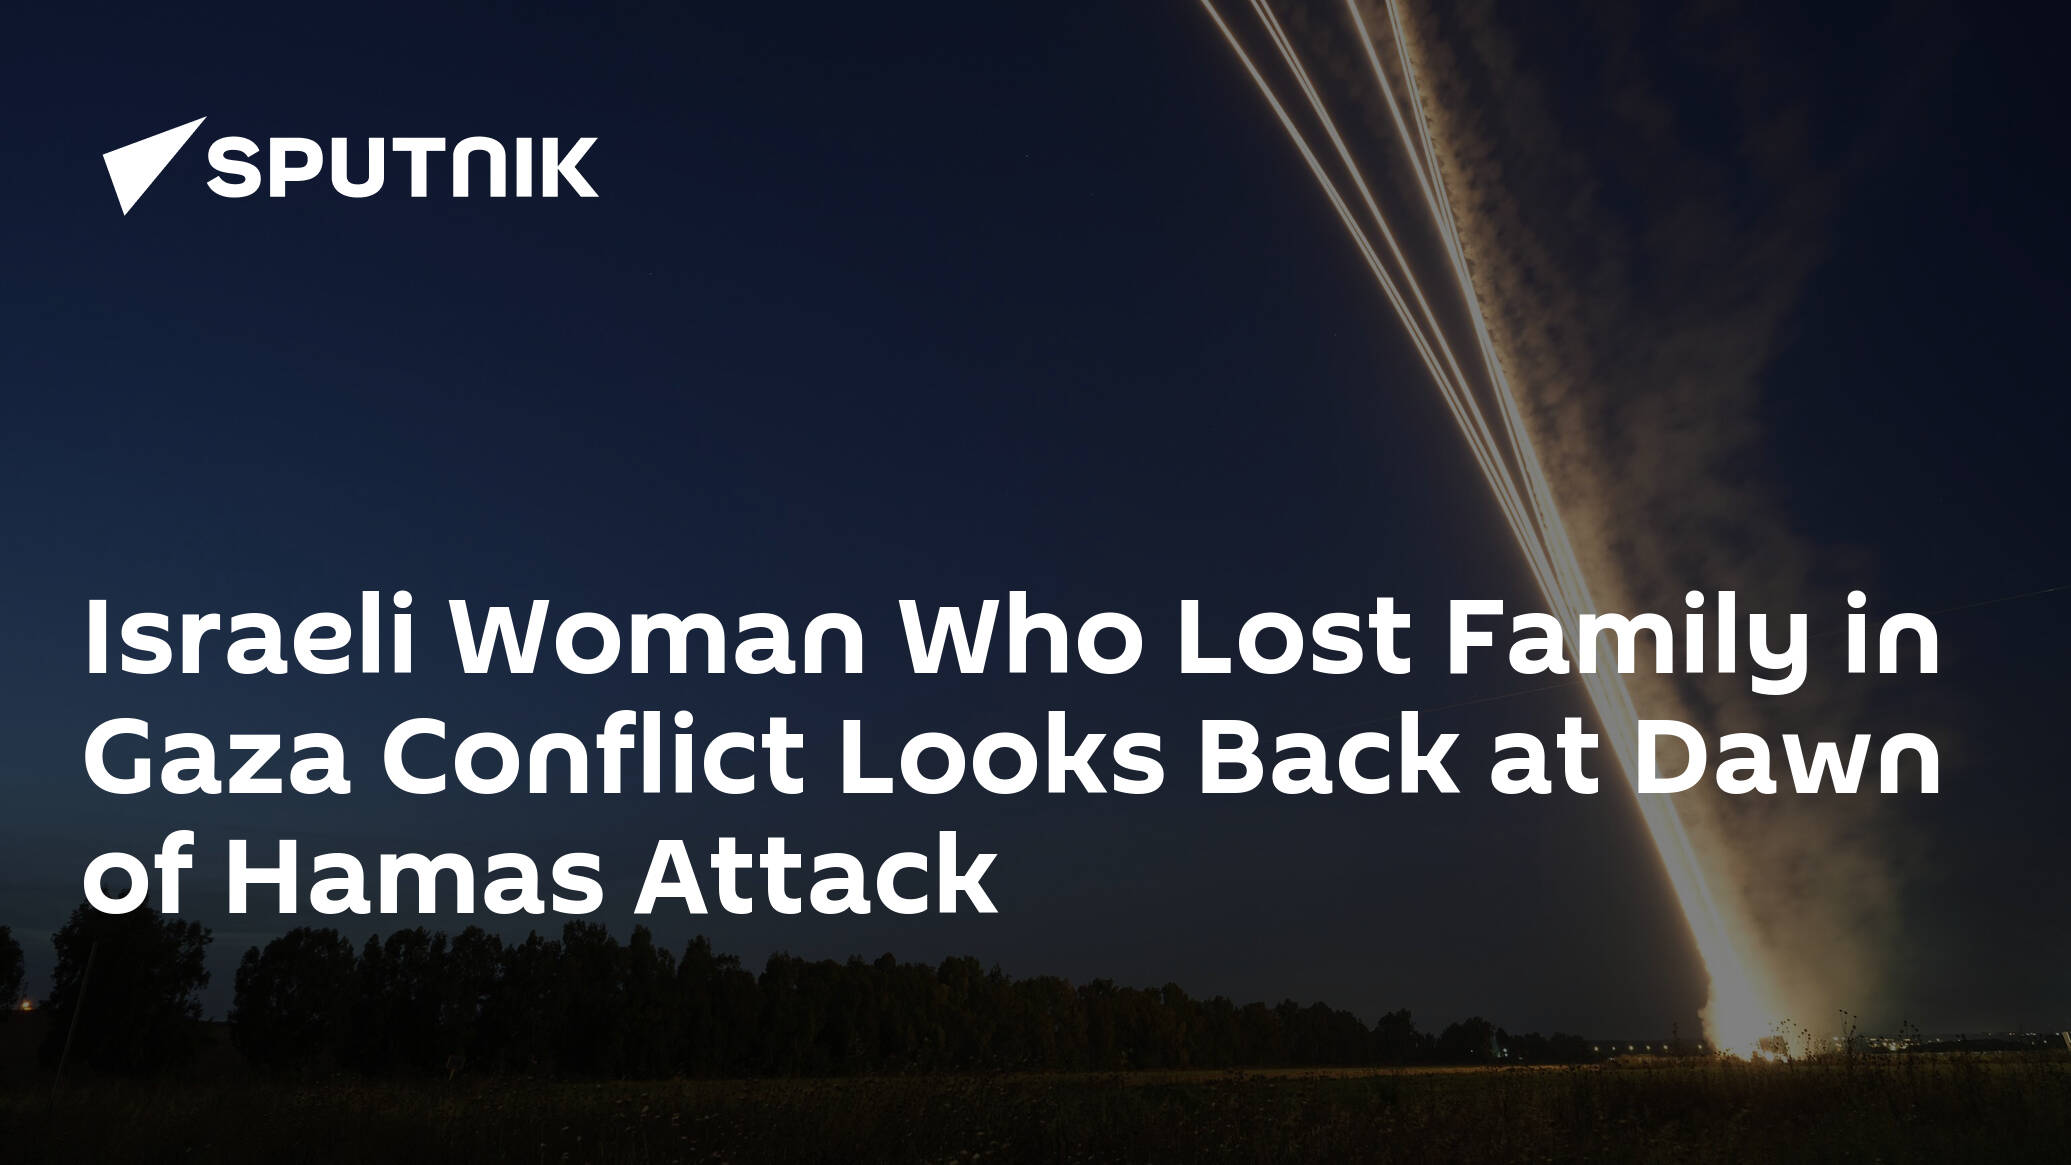 Israeli Woman Who Lost Family in Gaza Conflict Looks Back at Dawn of Hamas Attack